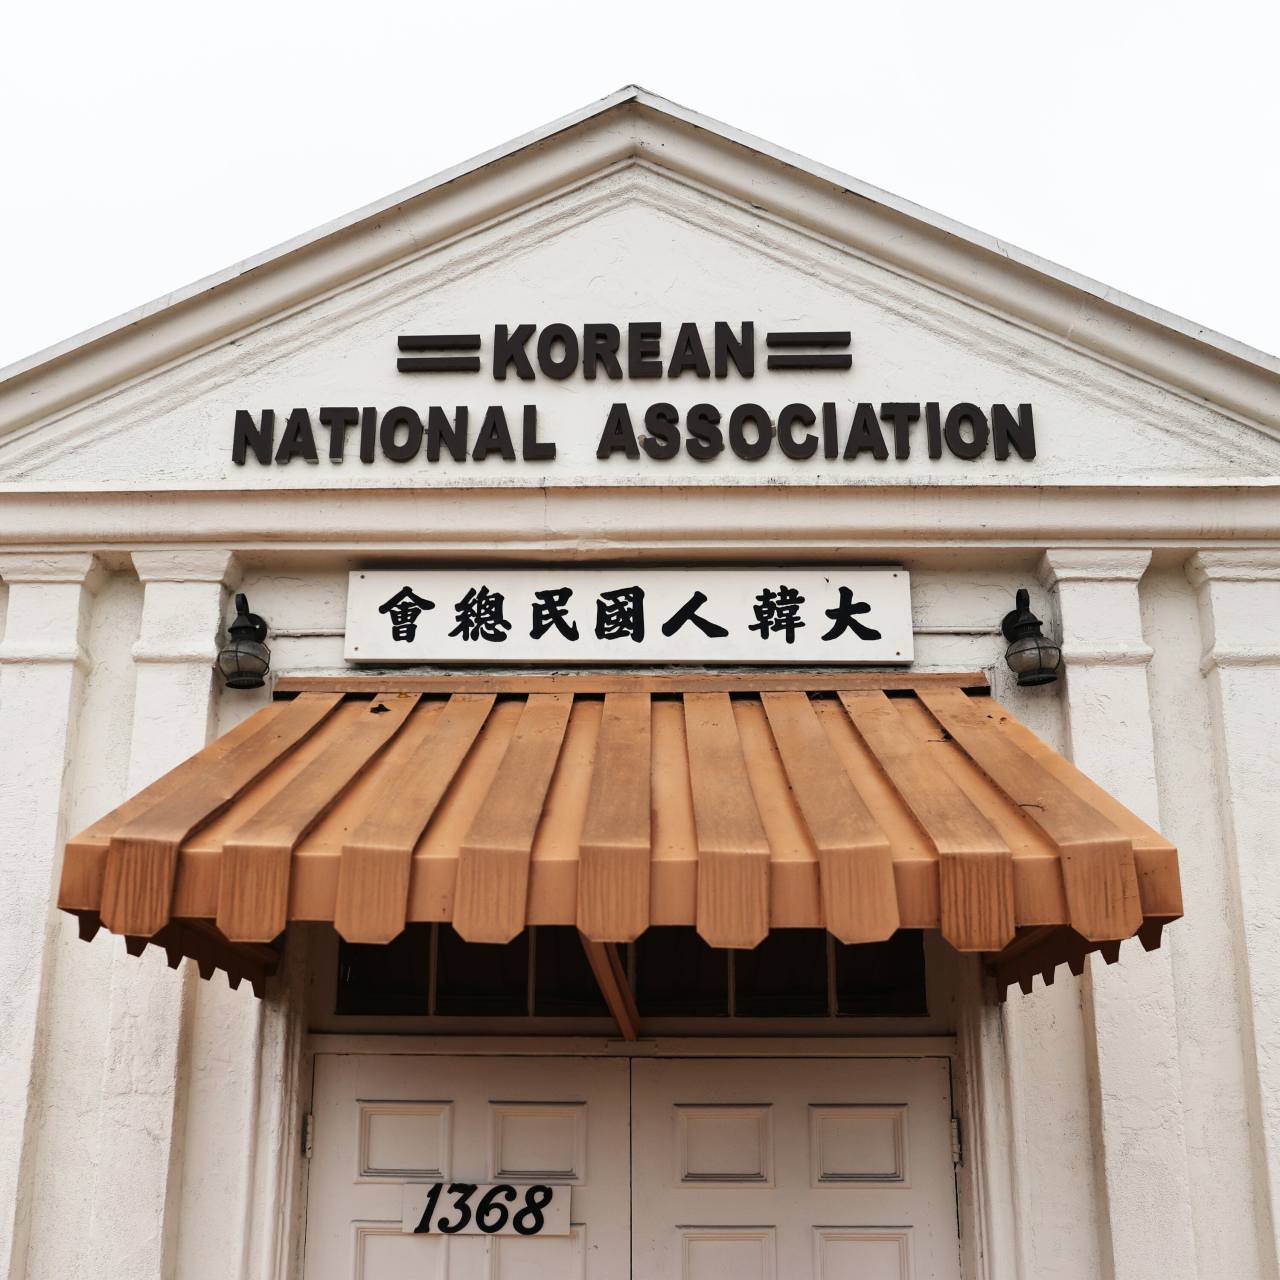 The Korean National Association headquarters in Los Angeles, which Dosan Ahn Chang-ho formed in the US to function as the de facto government for Koreans until the Provisional Government of Korea was launched in 1919. (Photo © 2021 Hyungwon Kang)